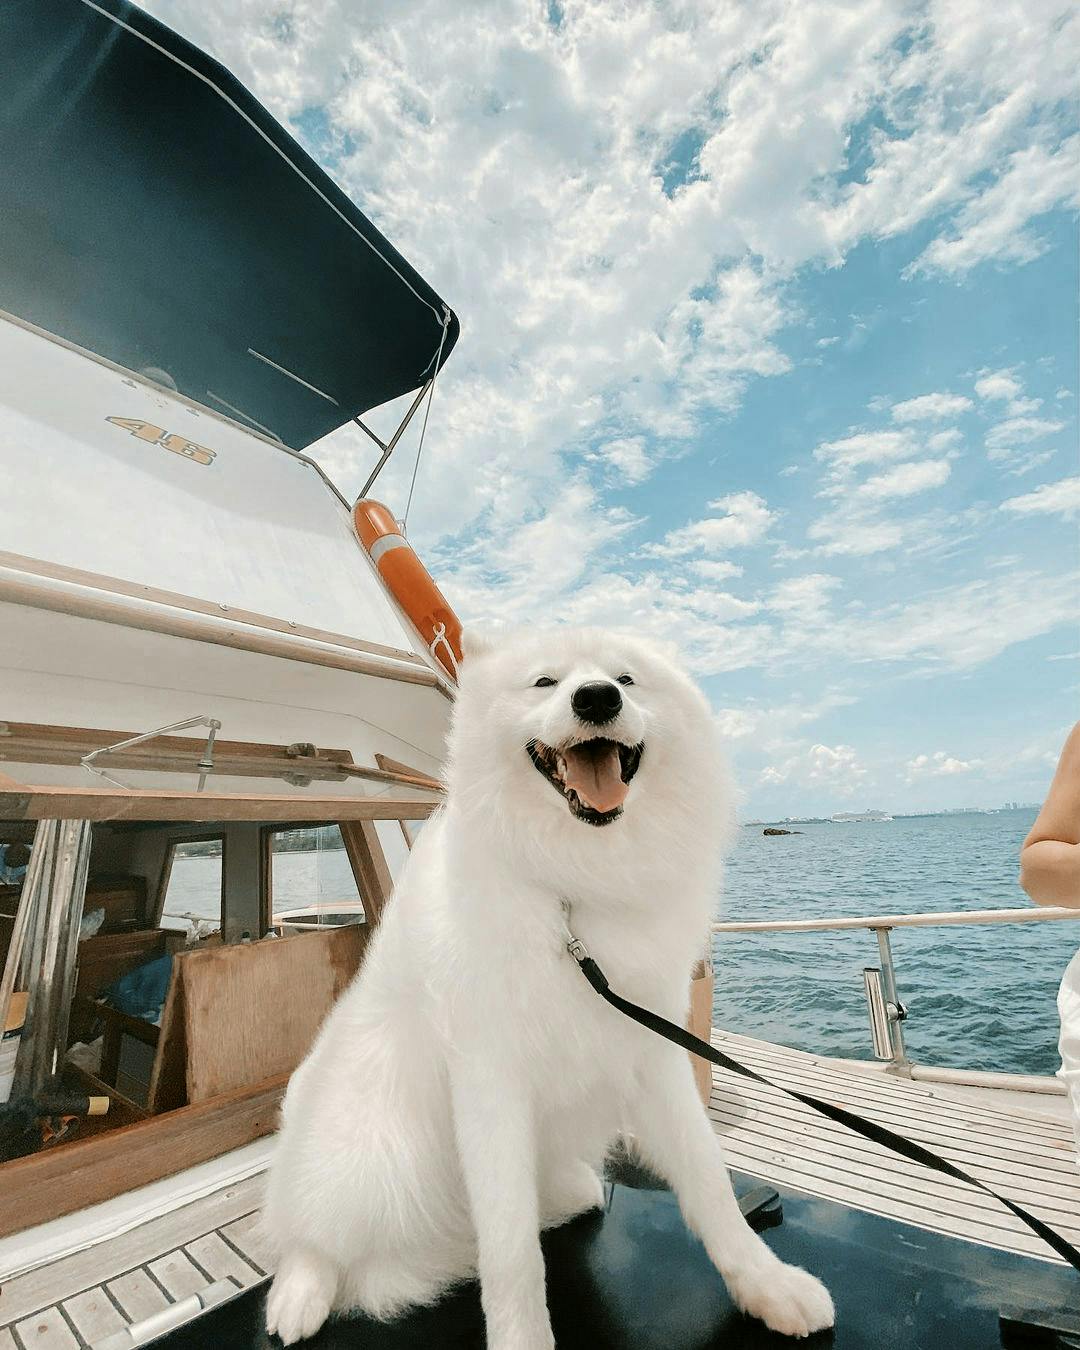 Can I bring my dogs on the yacht?